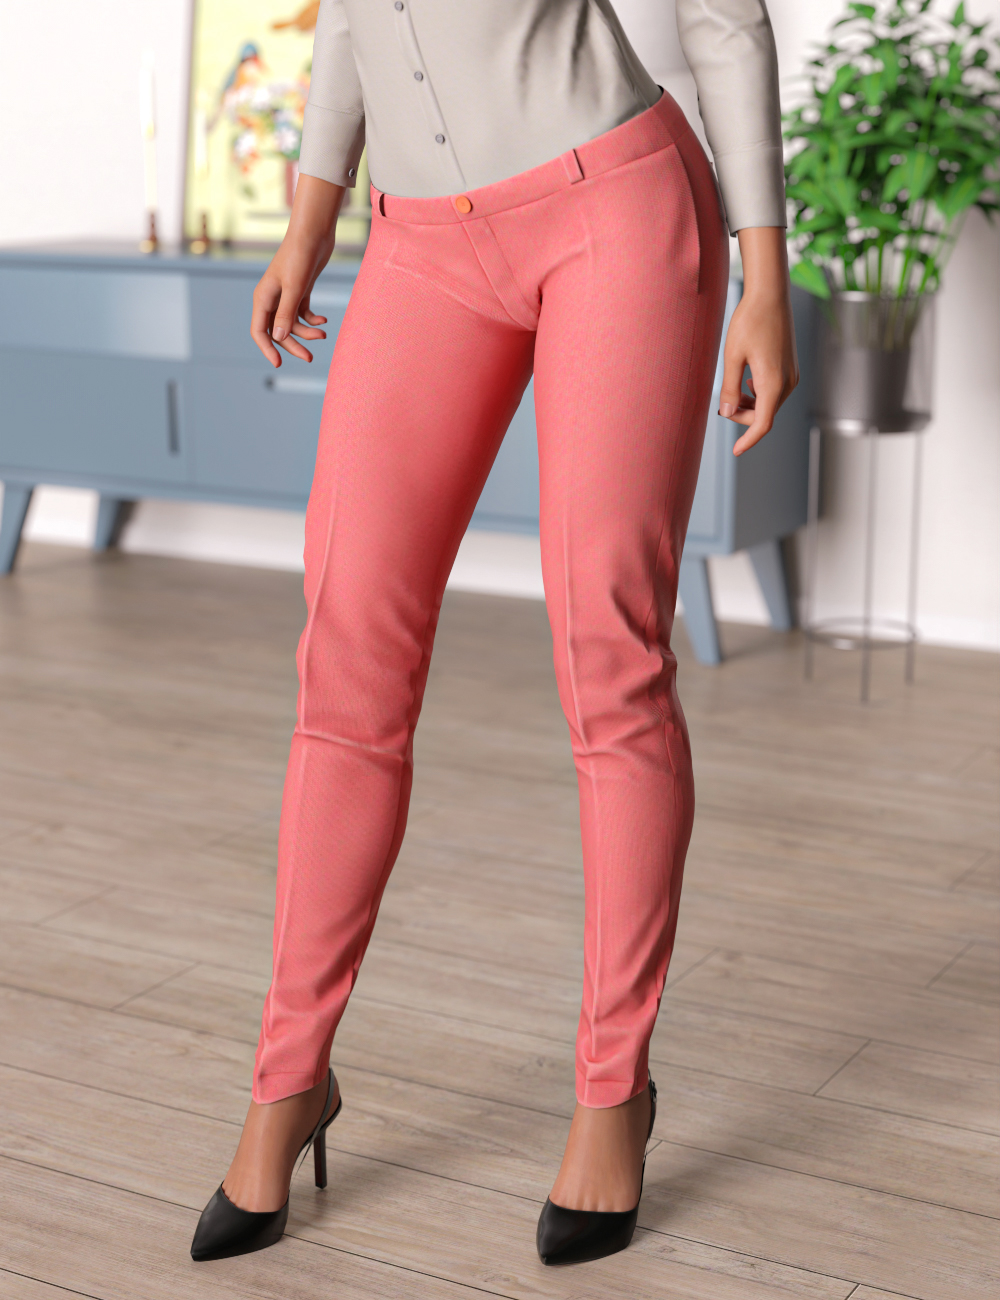 MDU dForce Trousers for Genesis 8 and 8.1 Females